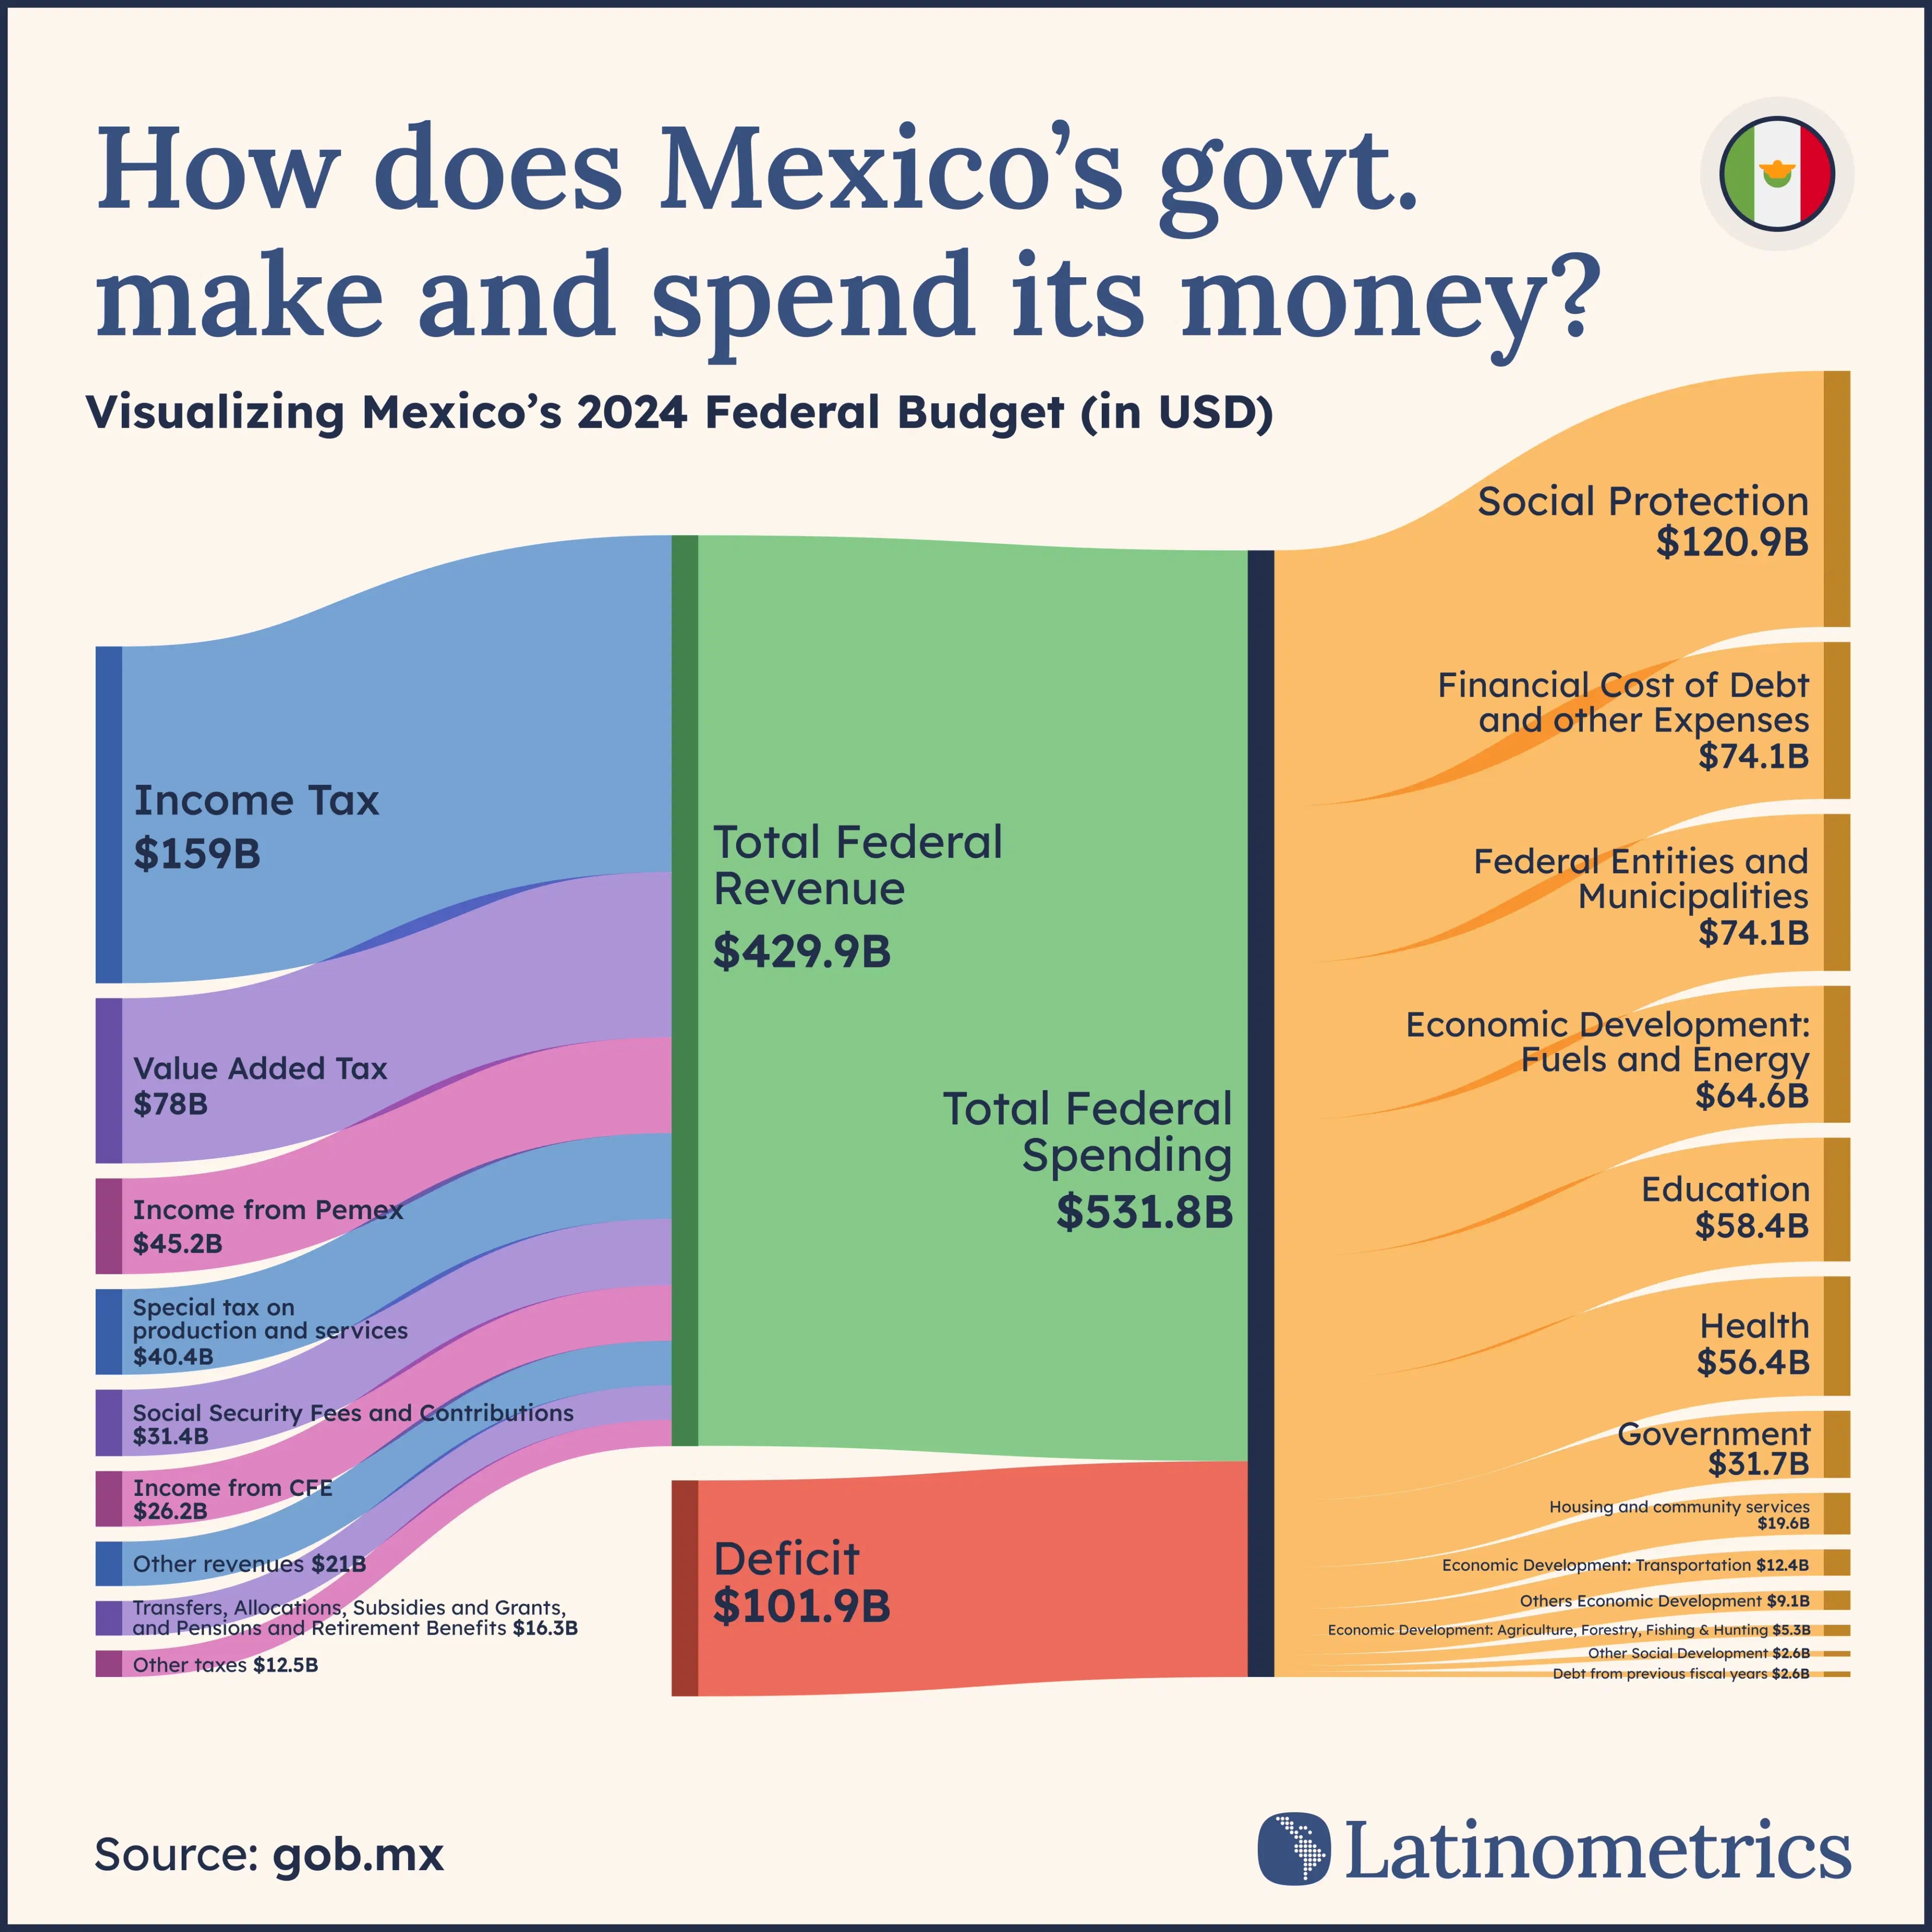 How does Mexico make and spend its money?